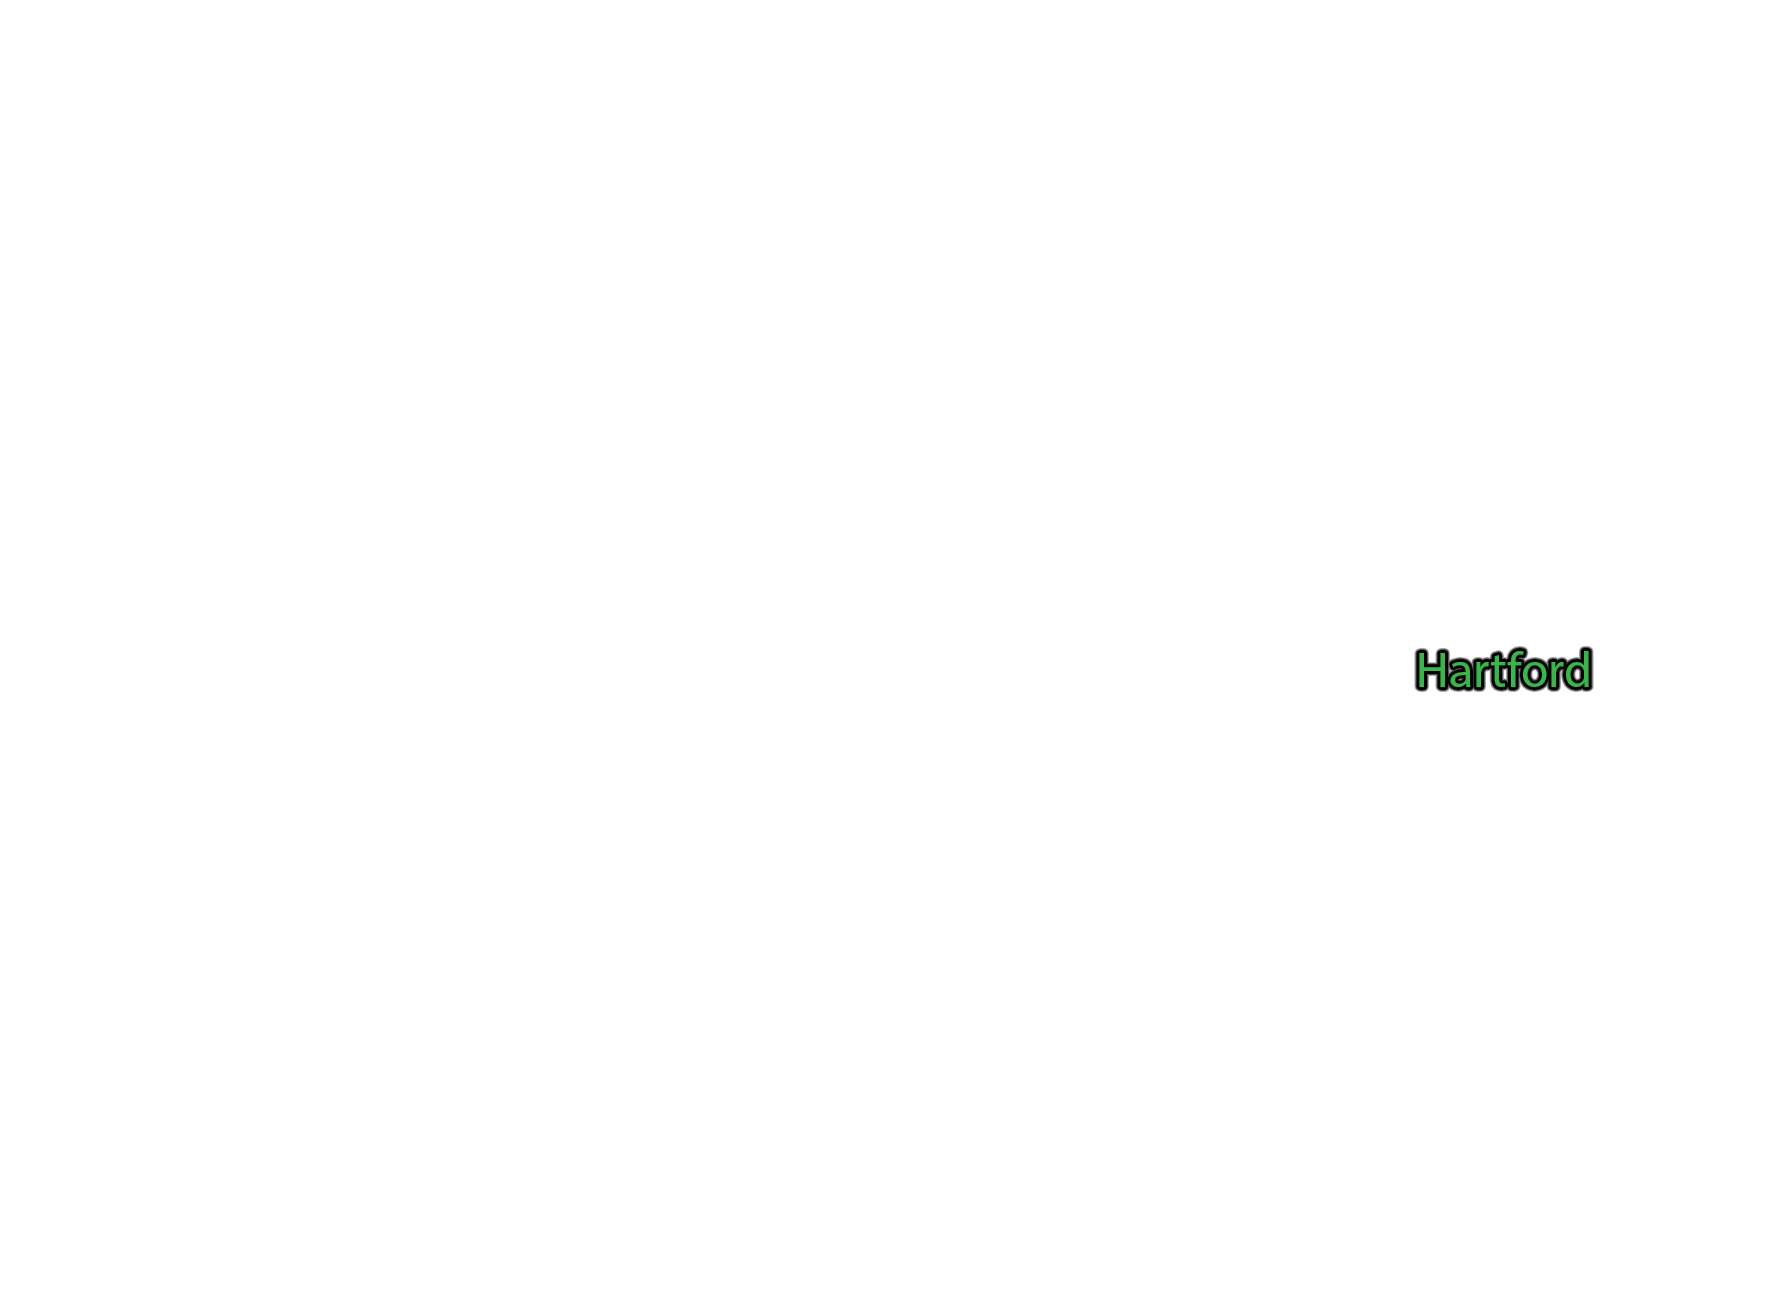 Hartford label with glow